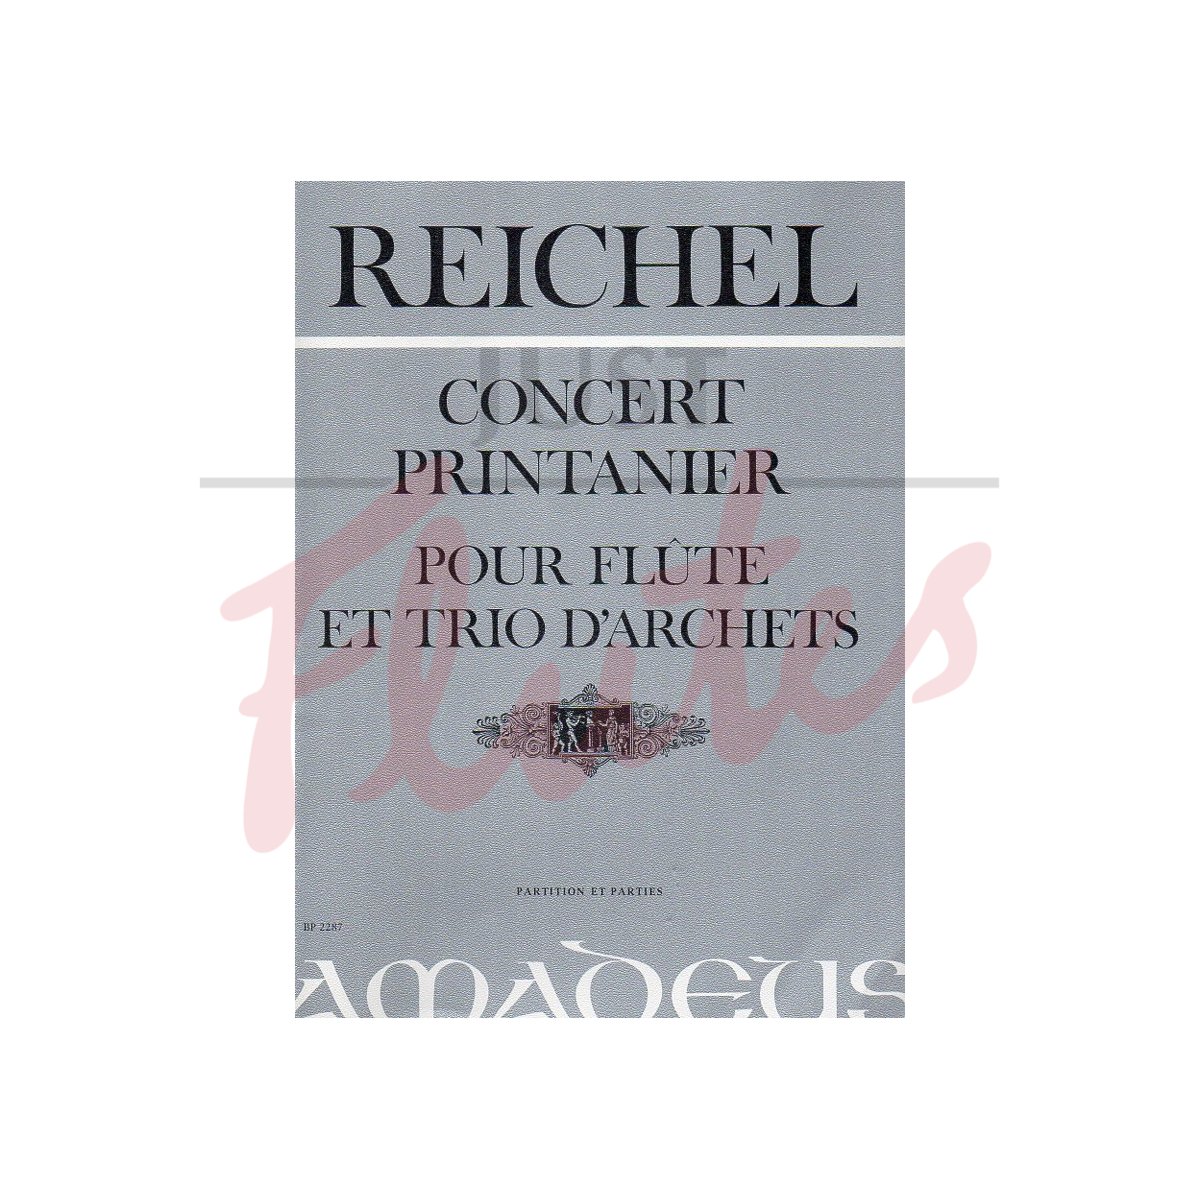 Concert Printanier for Flute and Strings